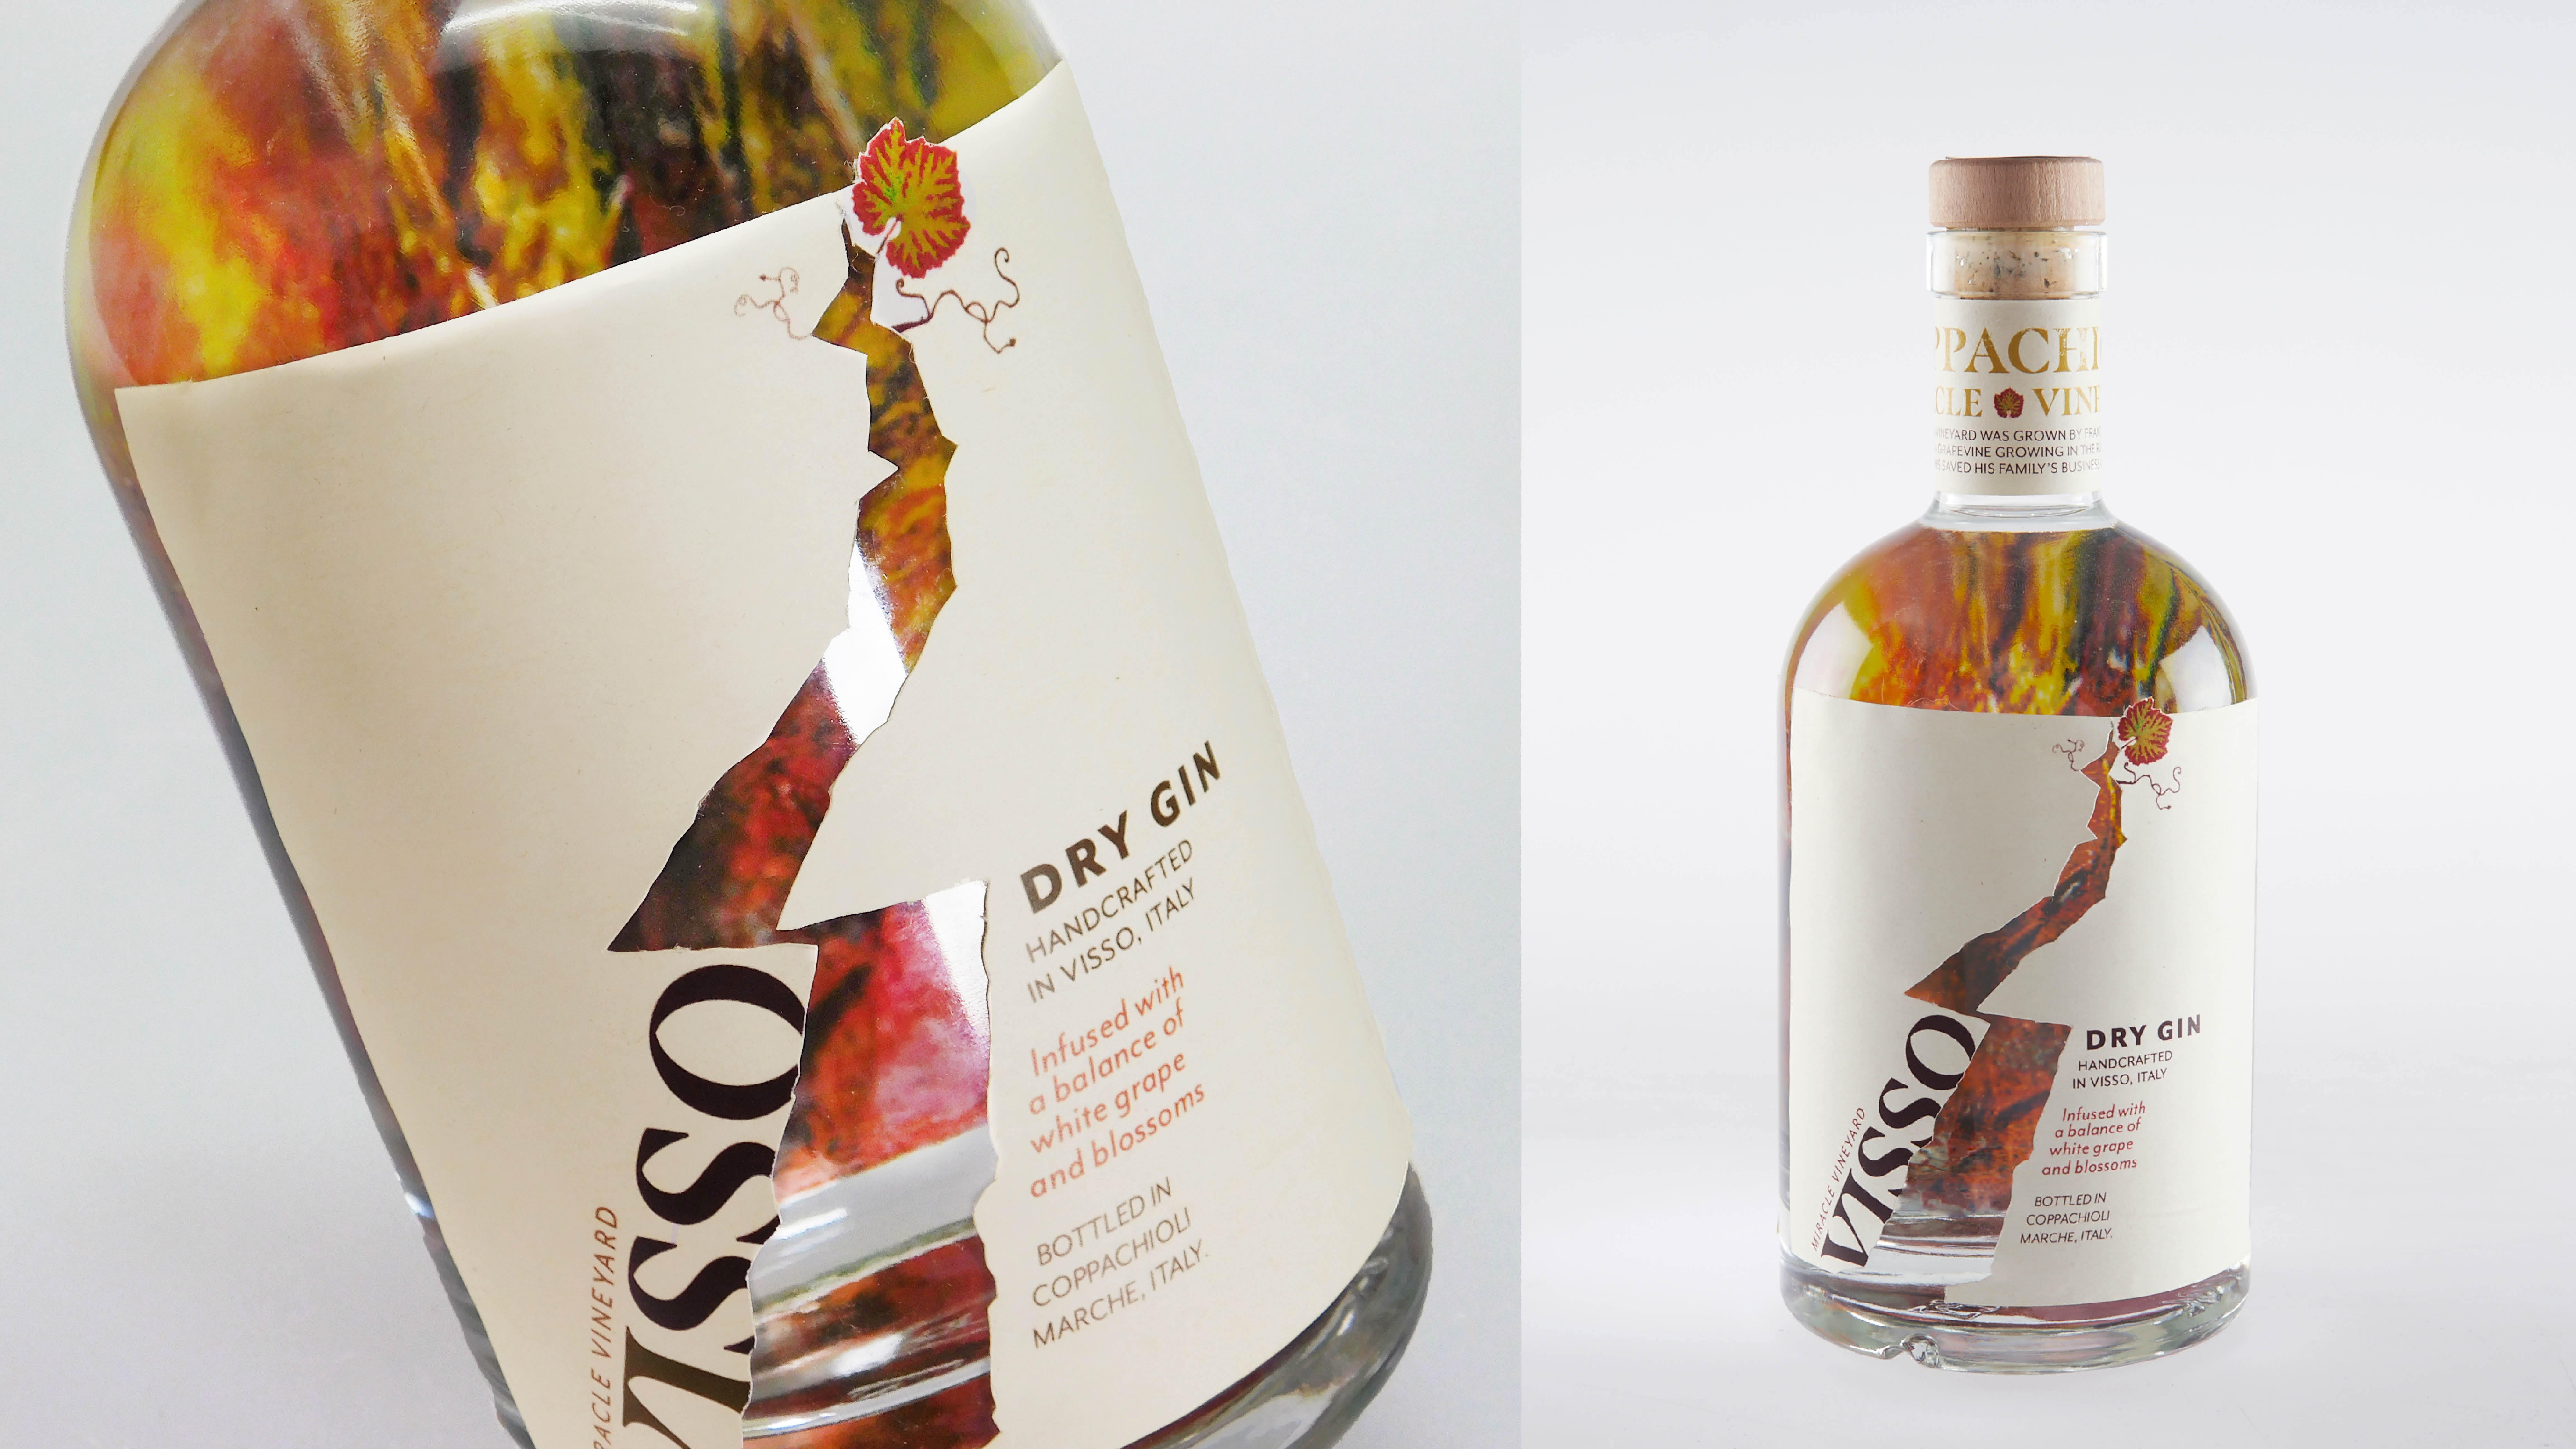 Photo of packaging design for Visso on gin bottle by Louise Awcock.